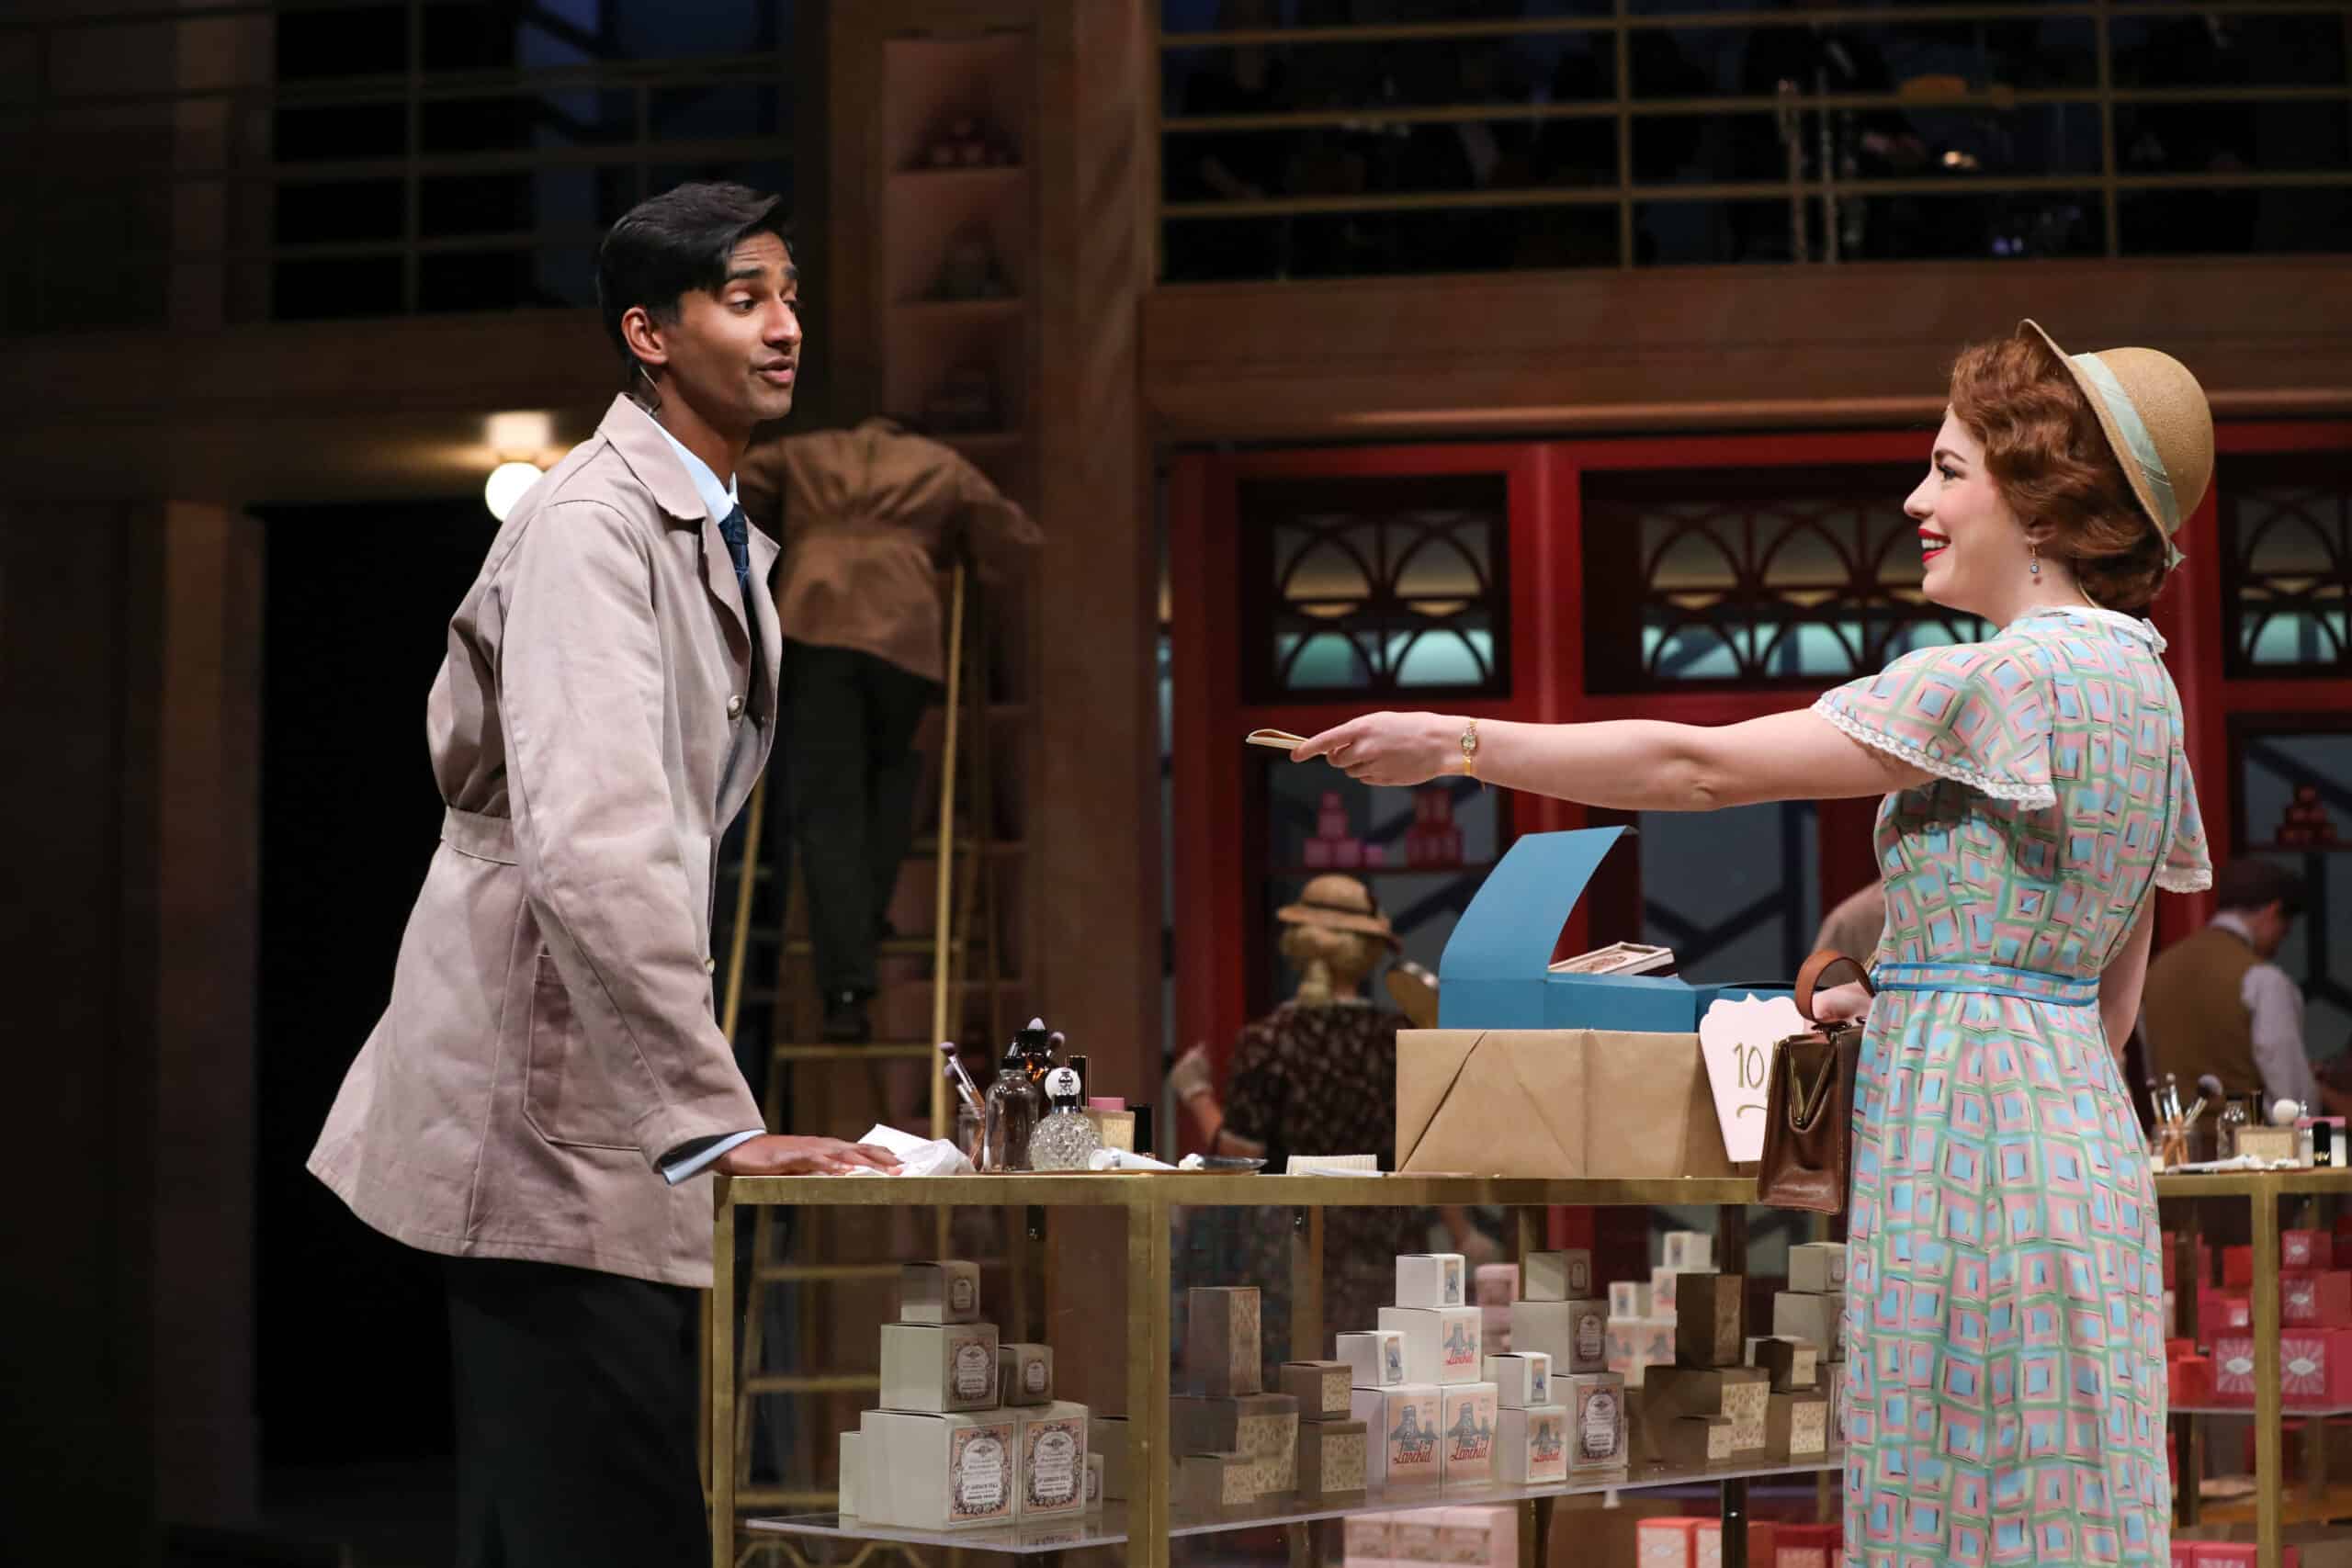 Michael Maliakel as Georg and Jenny Latimer as Amalia in PlayMakers Repertory company's production of SHE LOVE ME. Directed by Kirsten Sanderson. Costume design by Bobbi Owen.